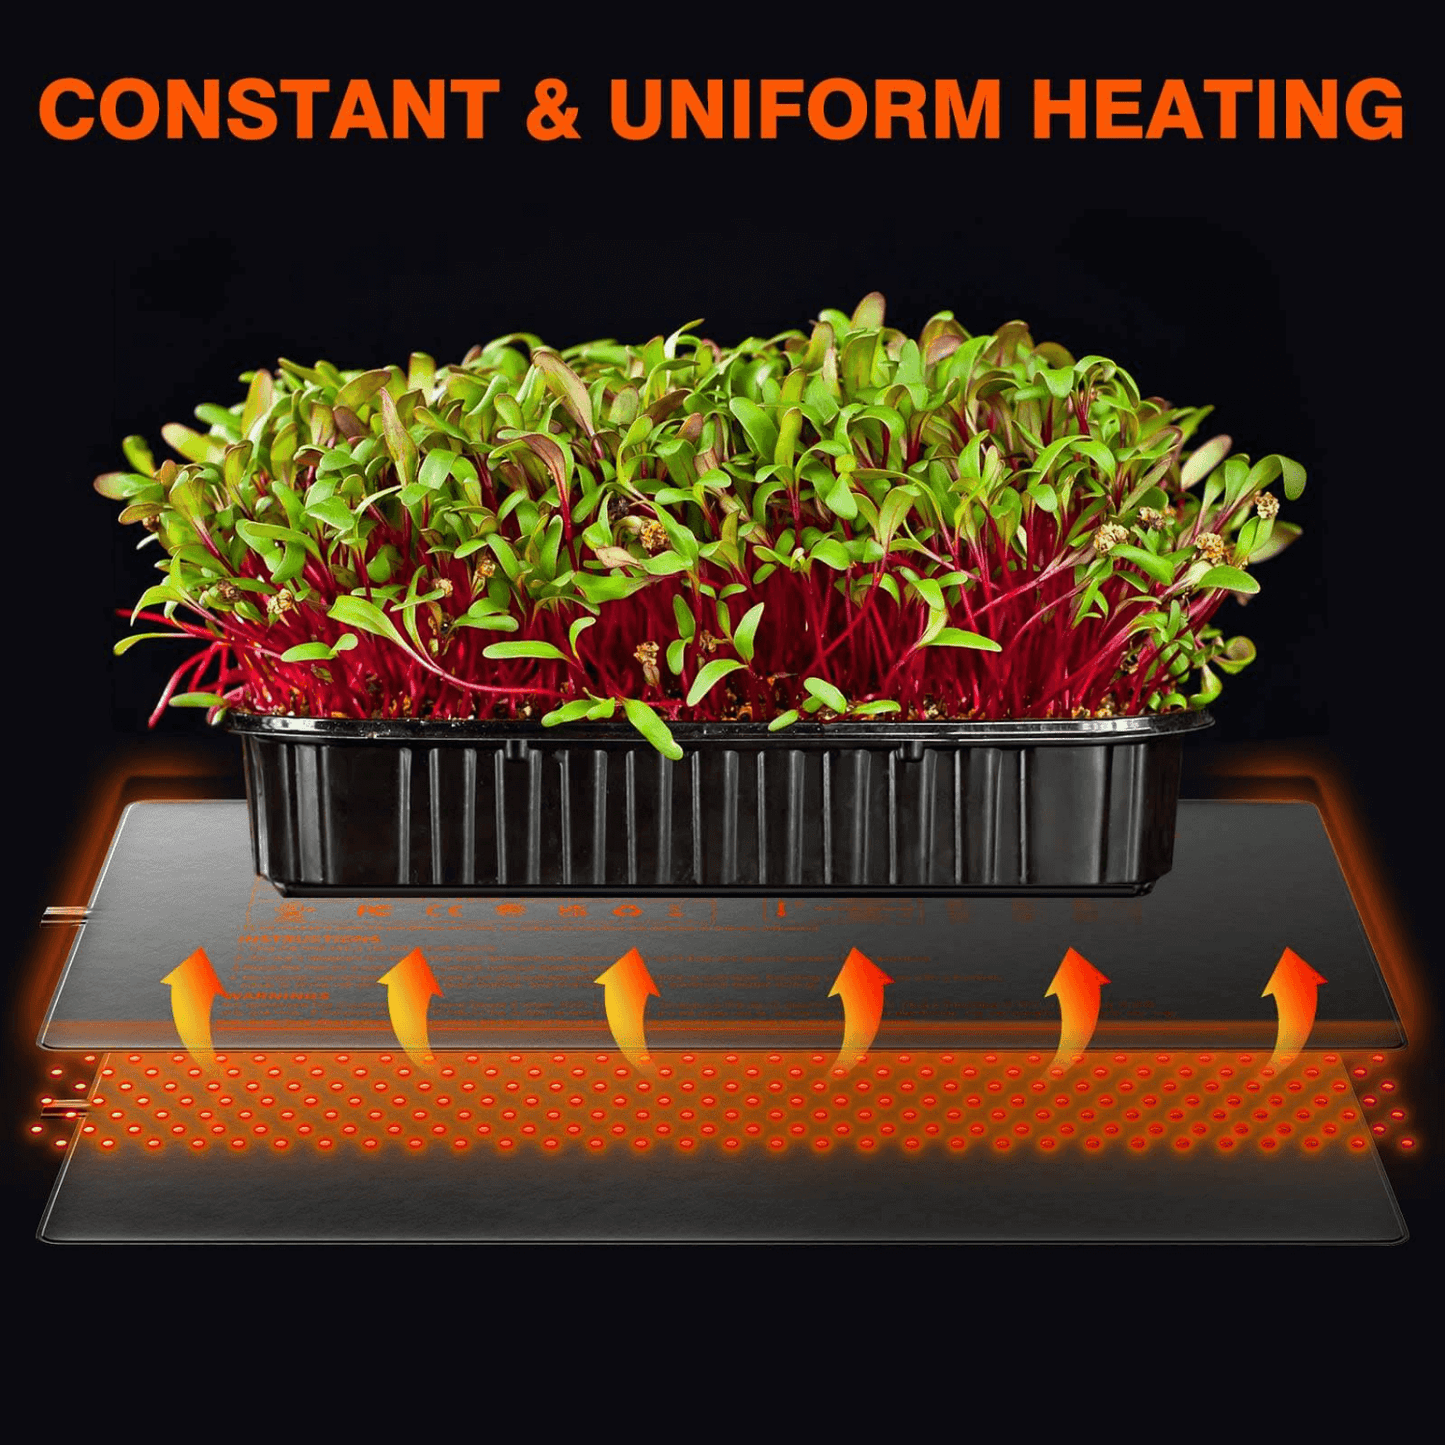 Spider Farmer 48" x 20.75" Seedling Heat Mat and Controller Set | SPIDER-SF-48x20MatKits-C | Grow Tents Depot | Planting & Watering | 6973280378319